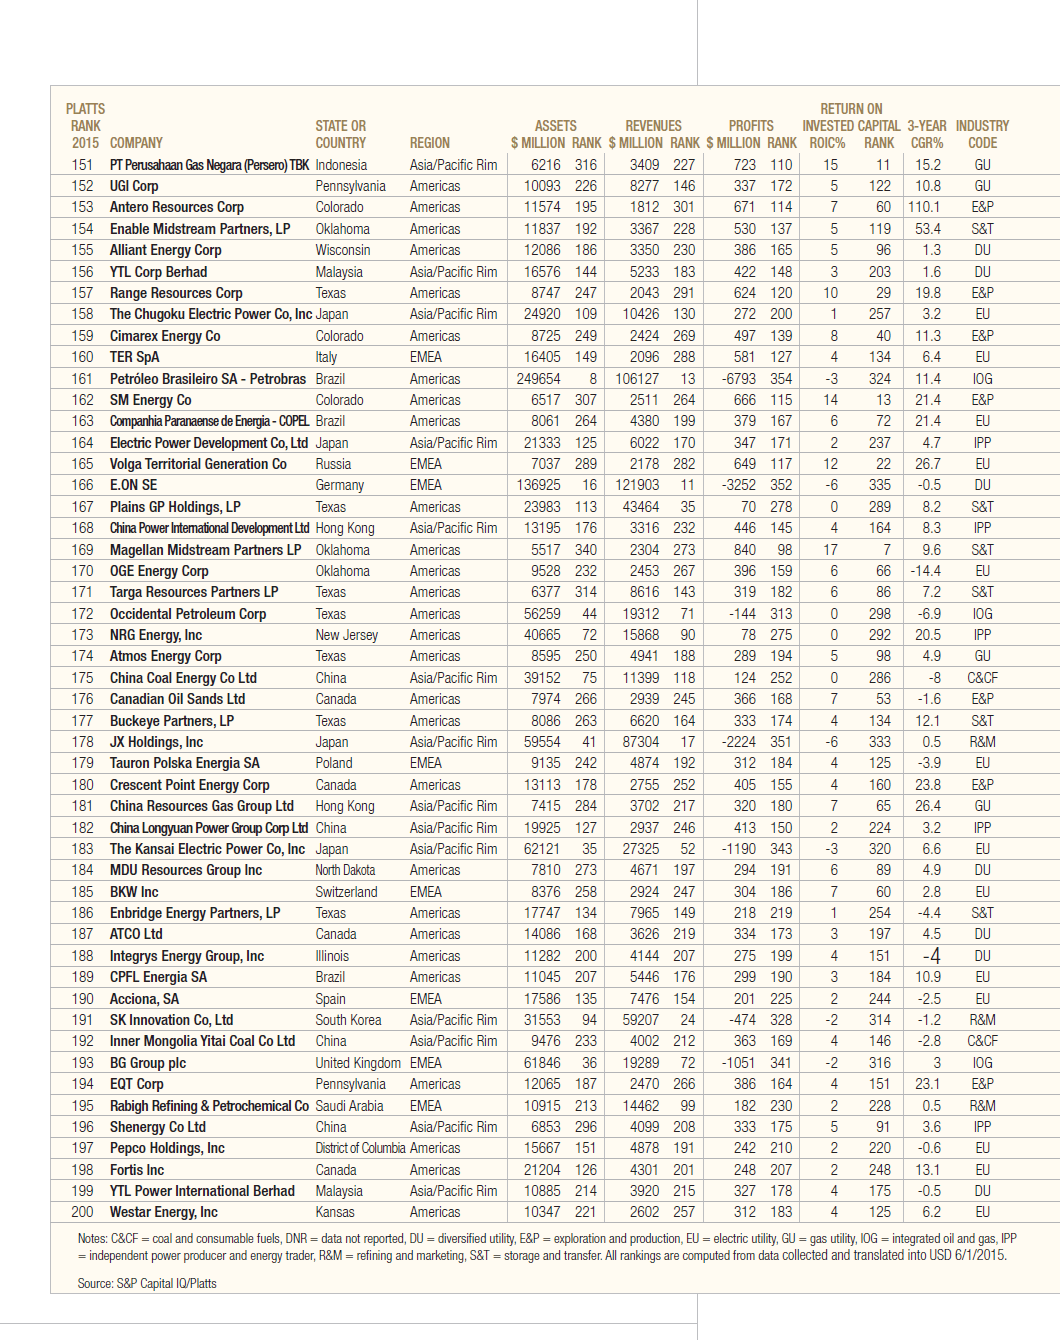 Platts Top 250 Energy Companies for 2015-Page 4